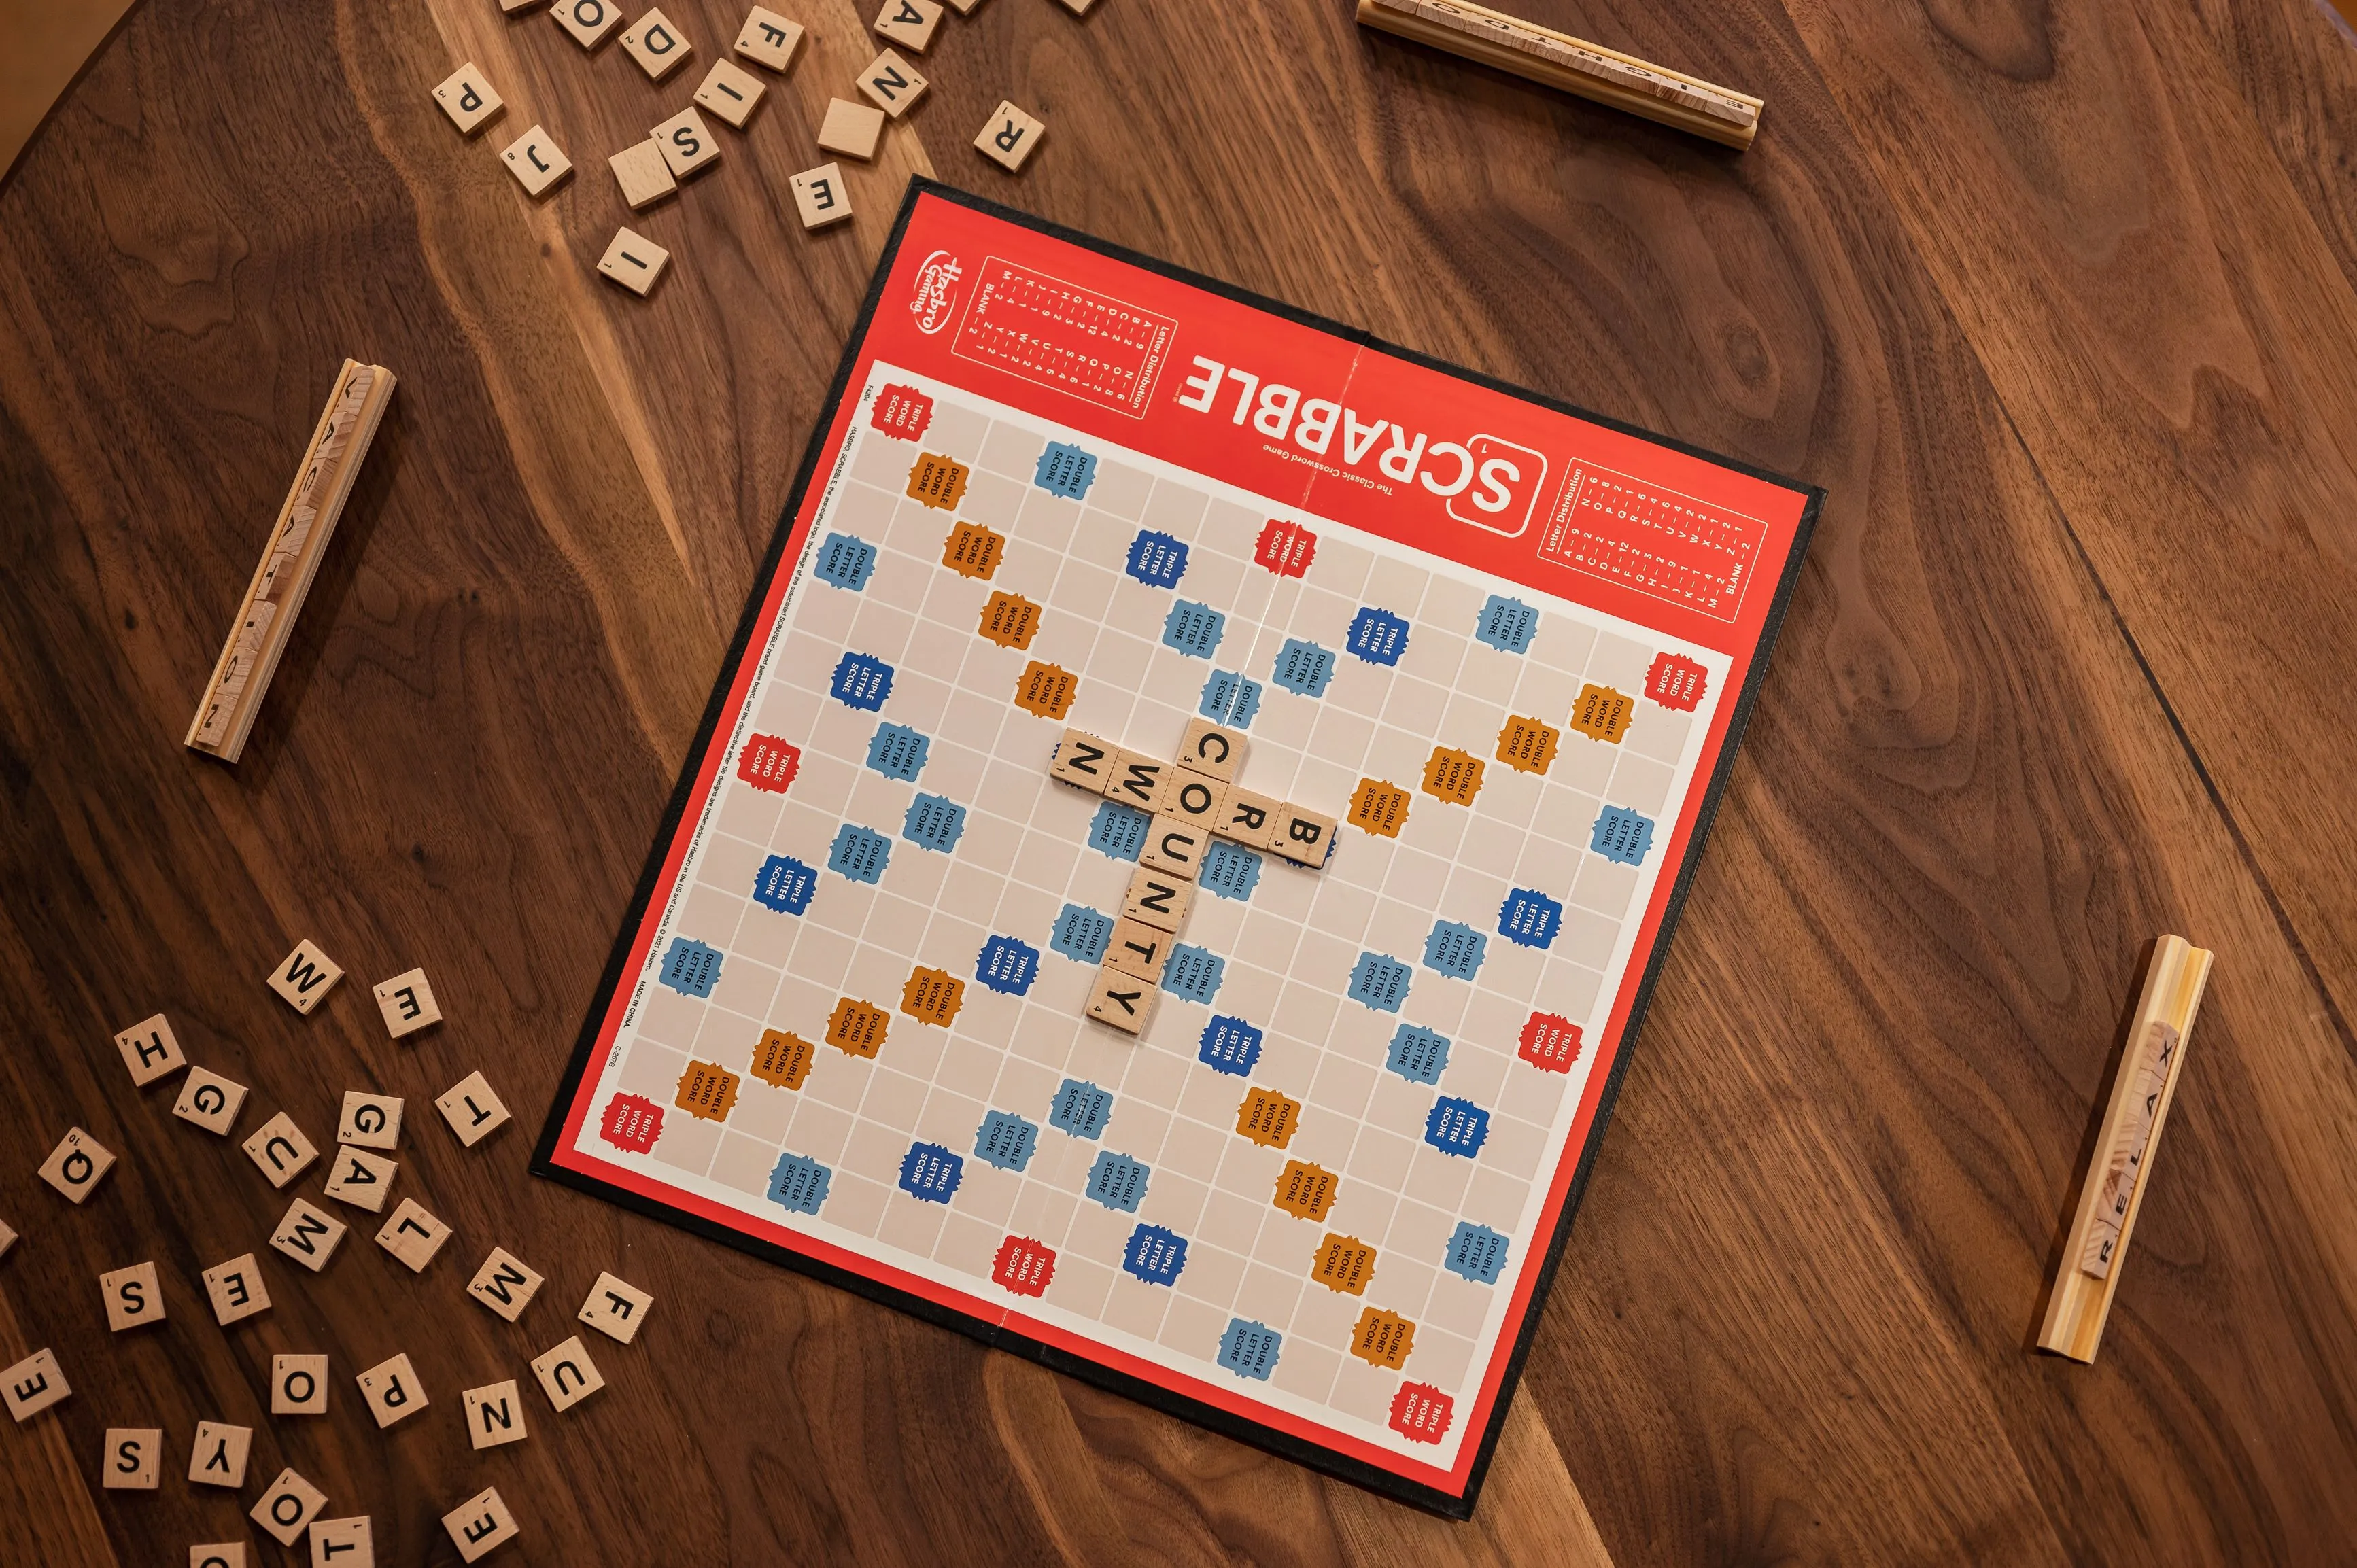 Scrabble board game on a wooden table with letter tiles scattered around and words 'COUNTY' on the board.